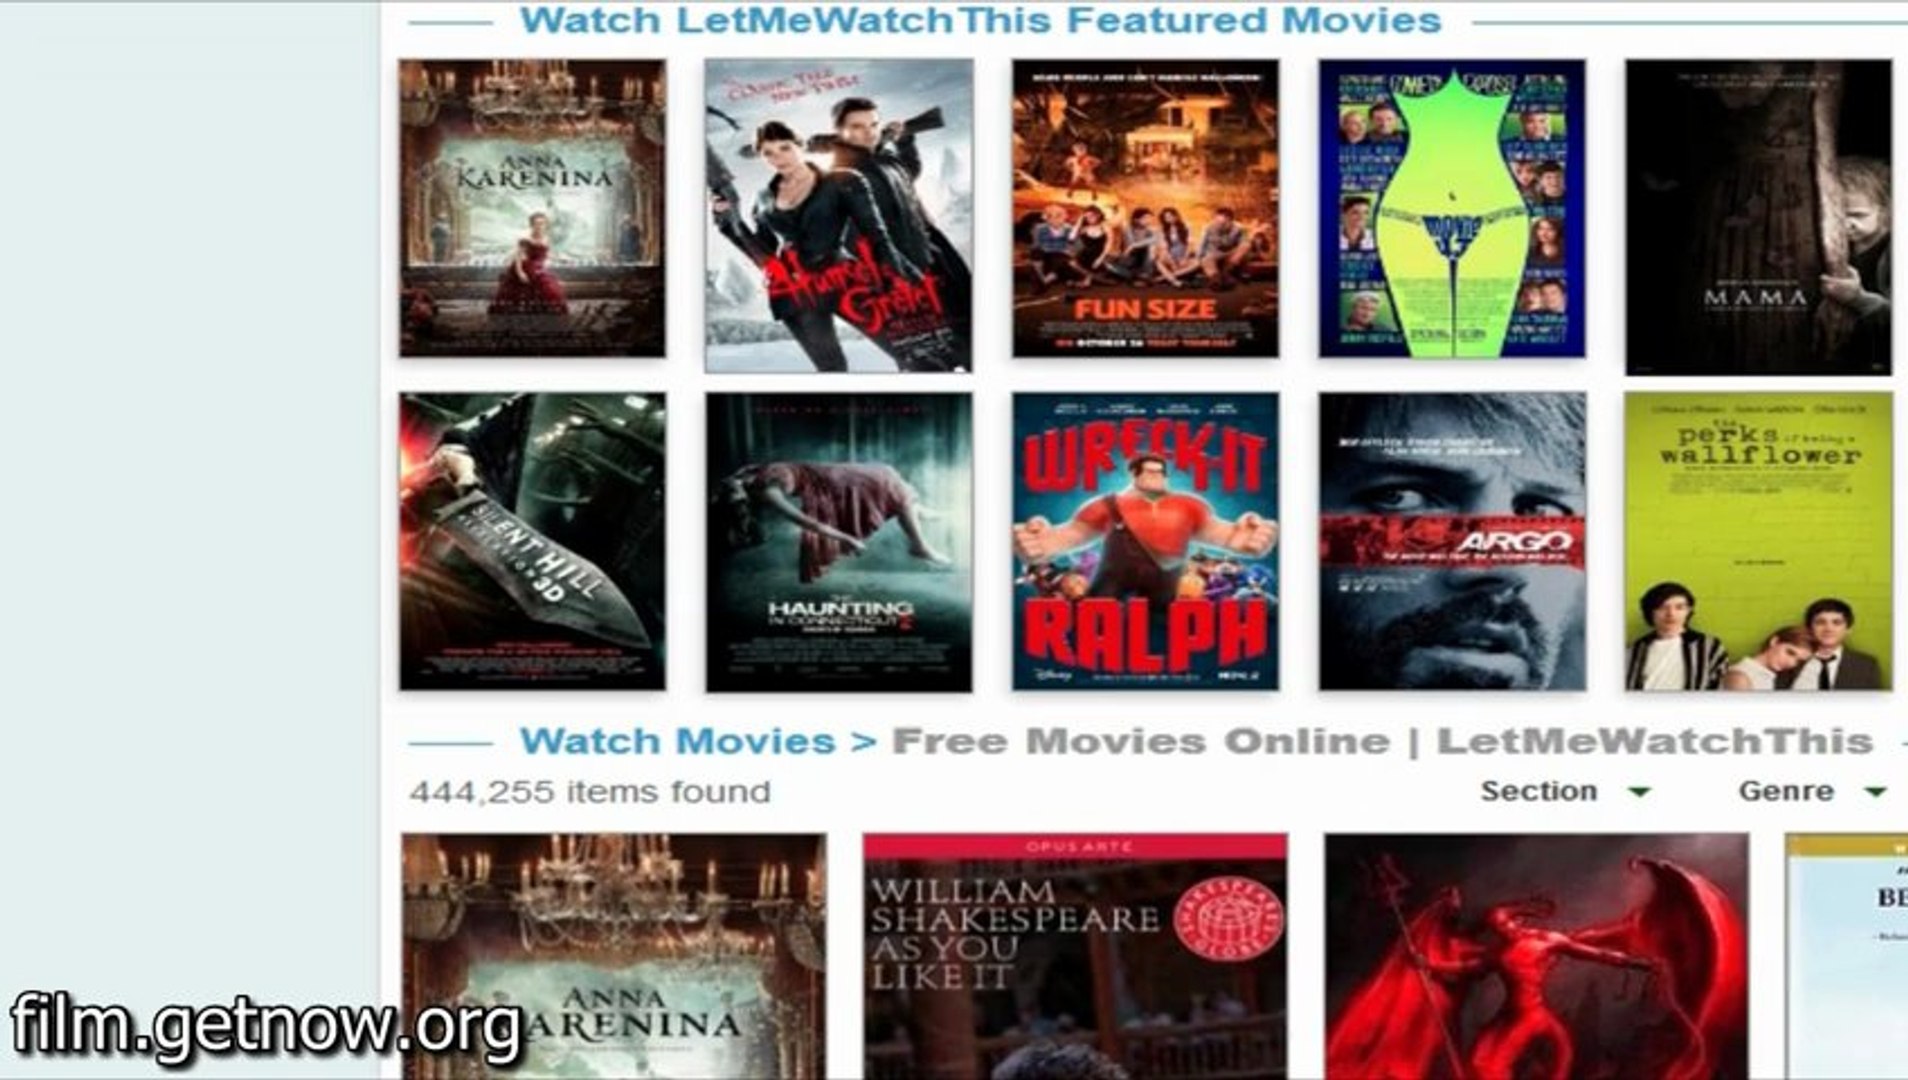 Featured movies